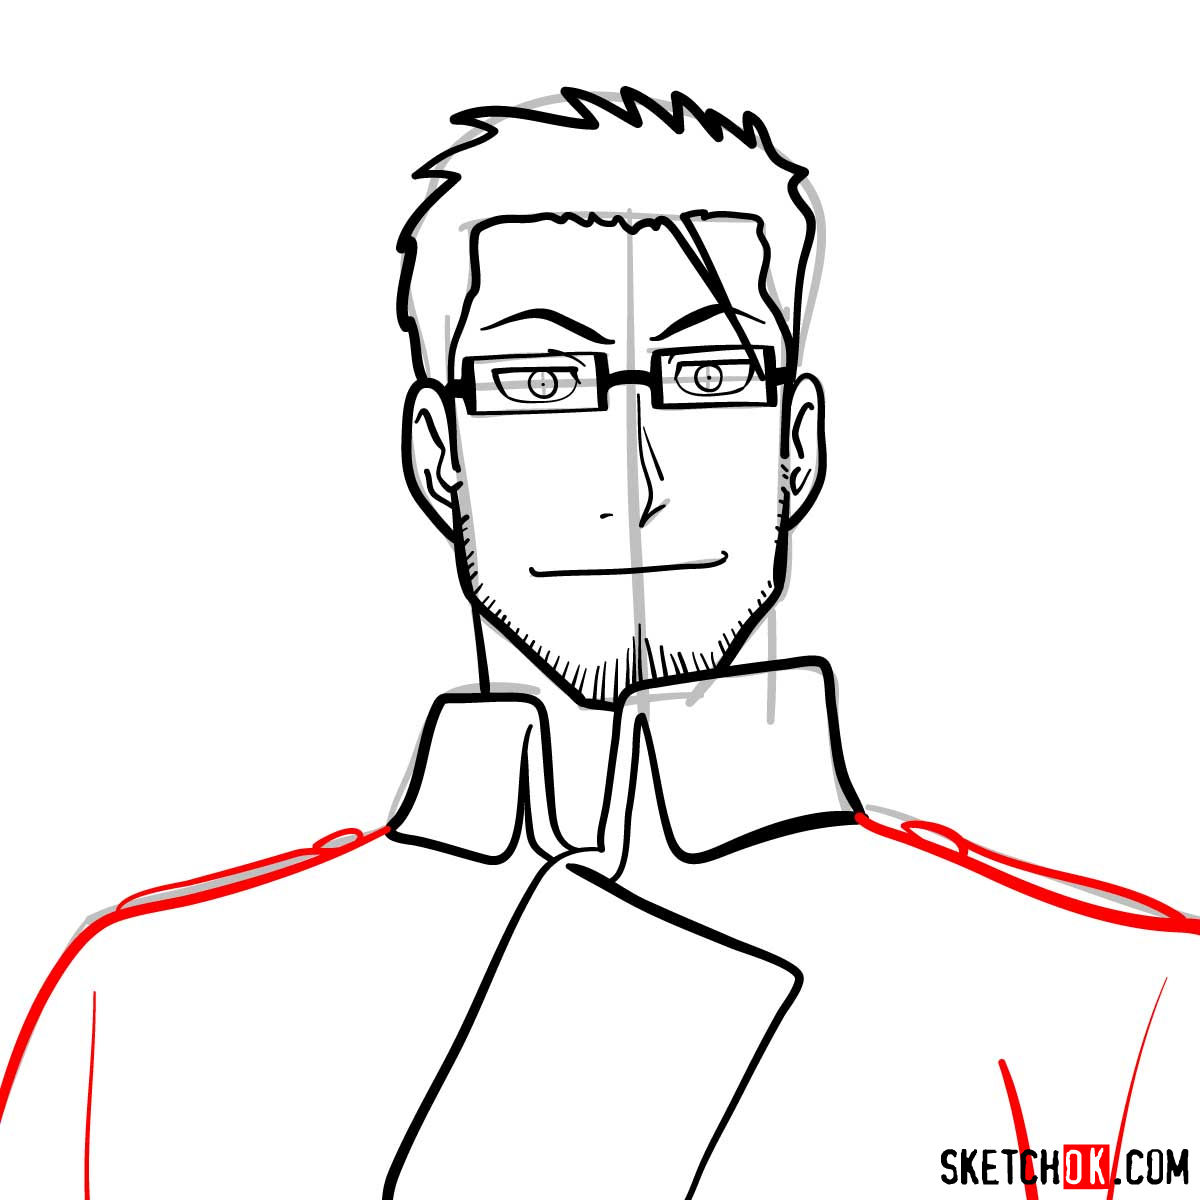 How to draw Maes Hughes from Fullmetal Alchemist anime - step 09